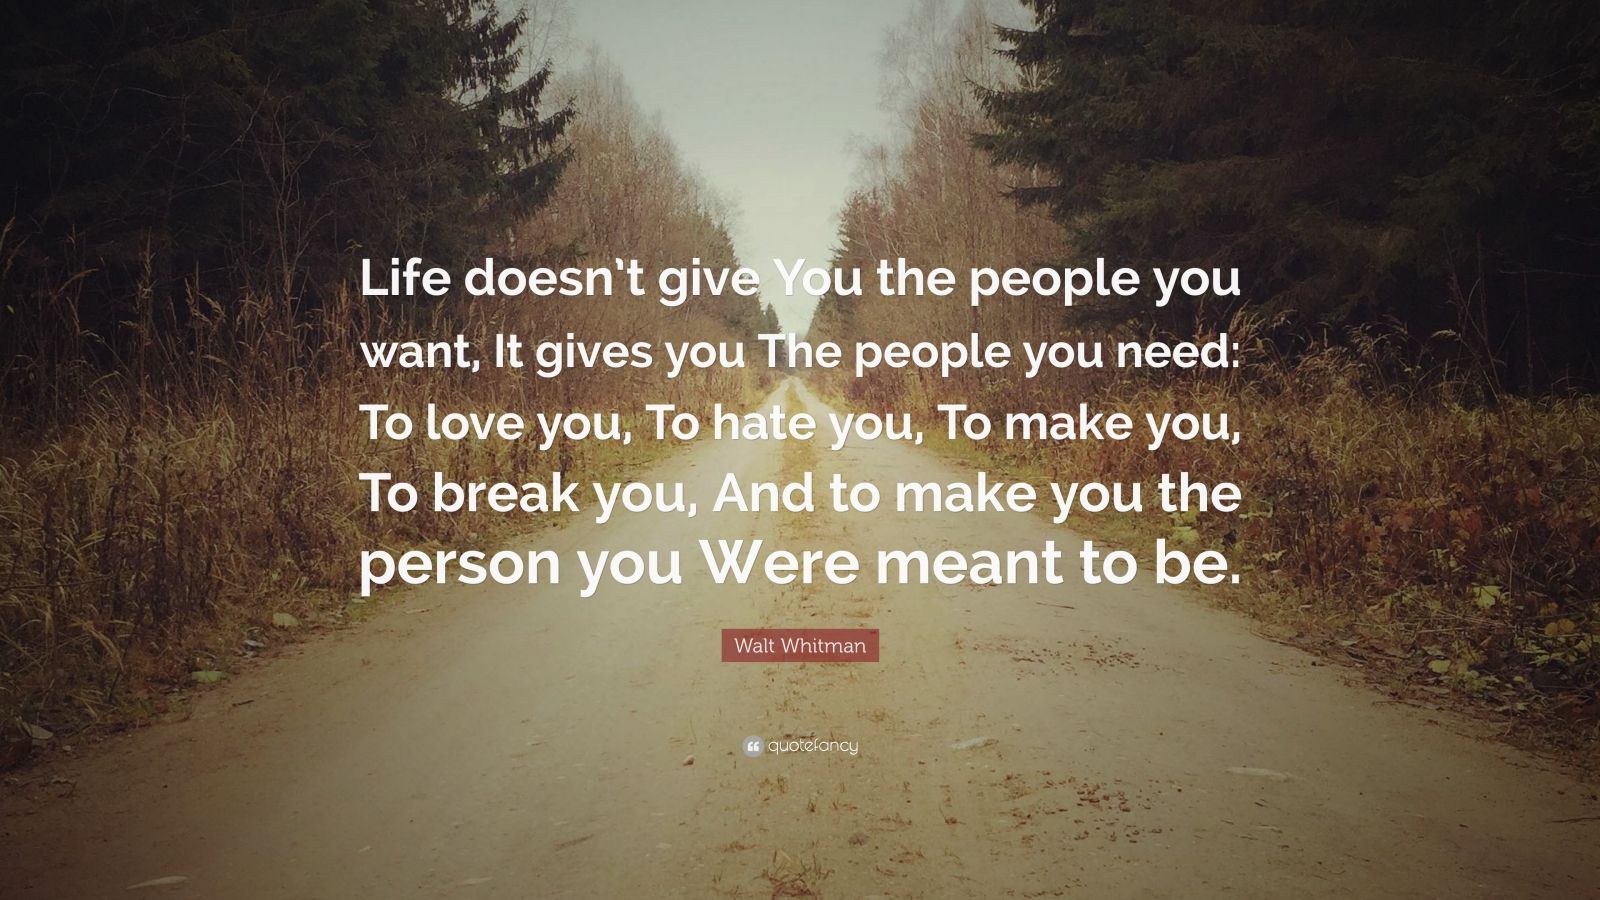 Walt Whitman Quote: “Life doesn’t give You the people you want, It